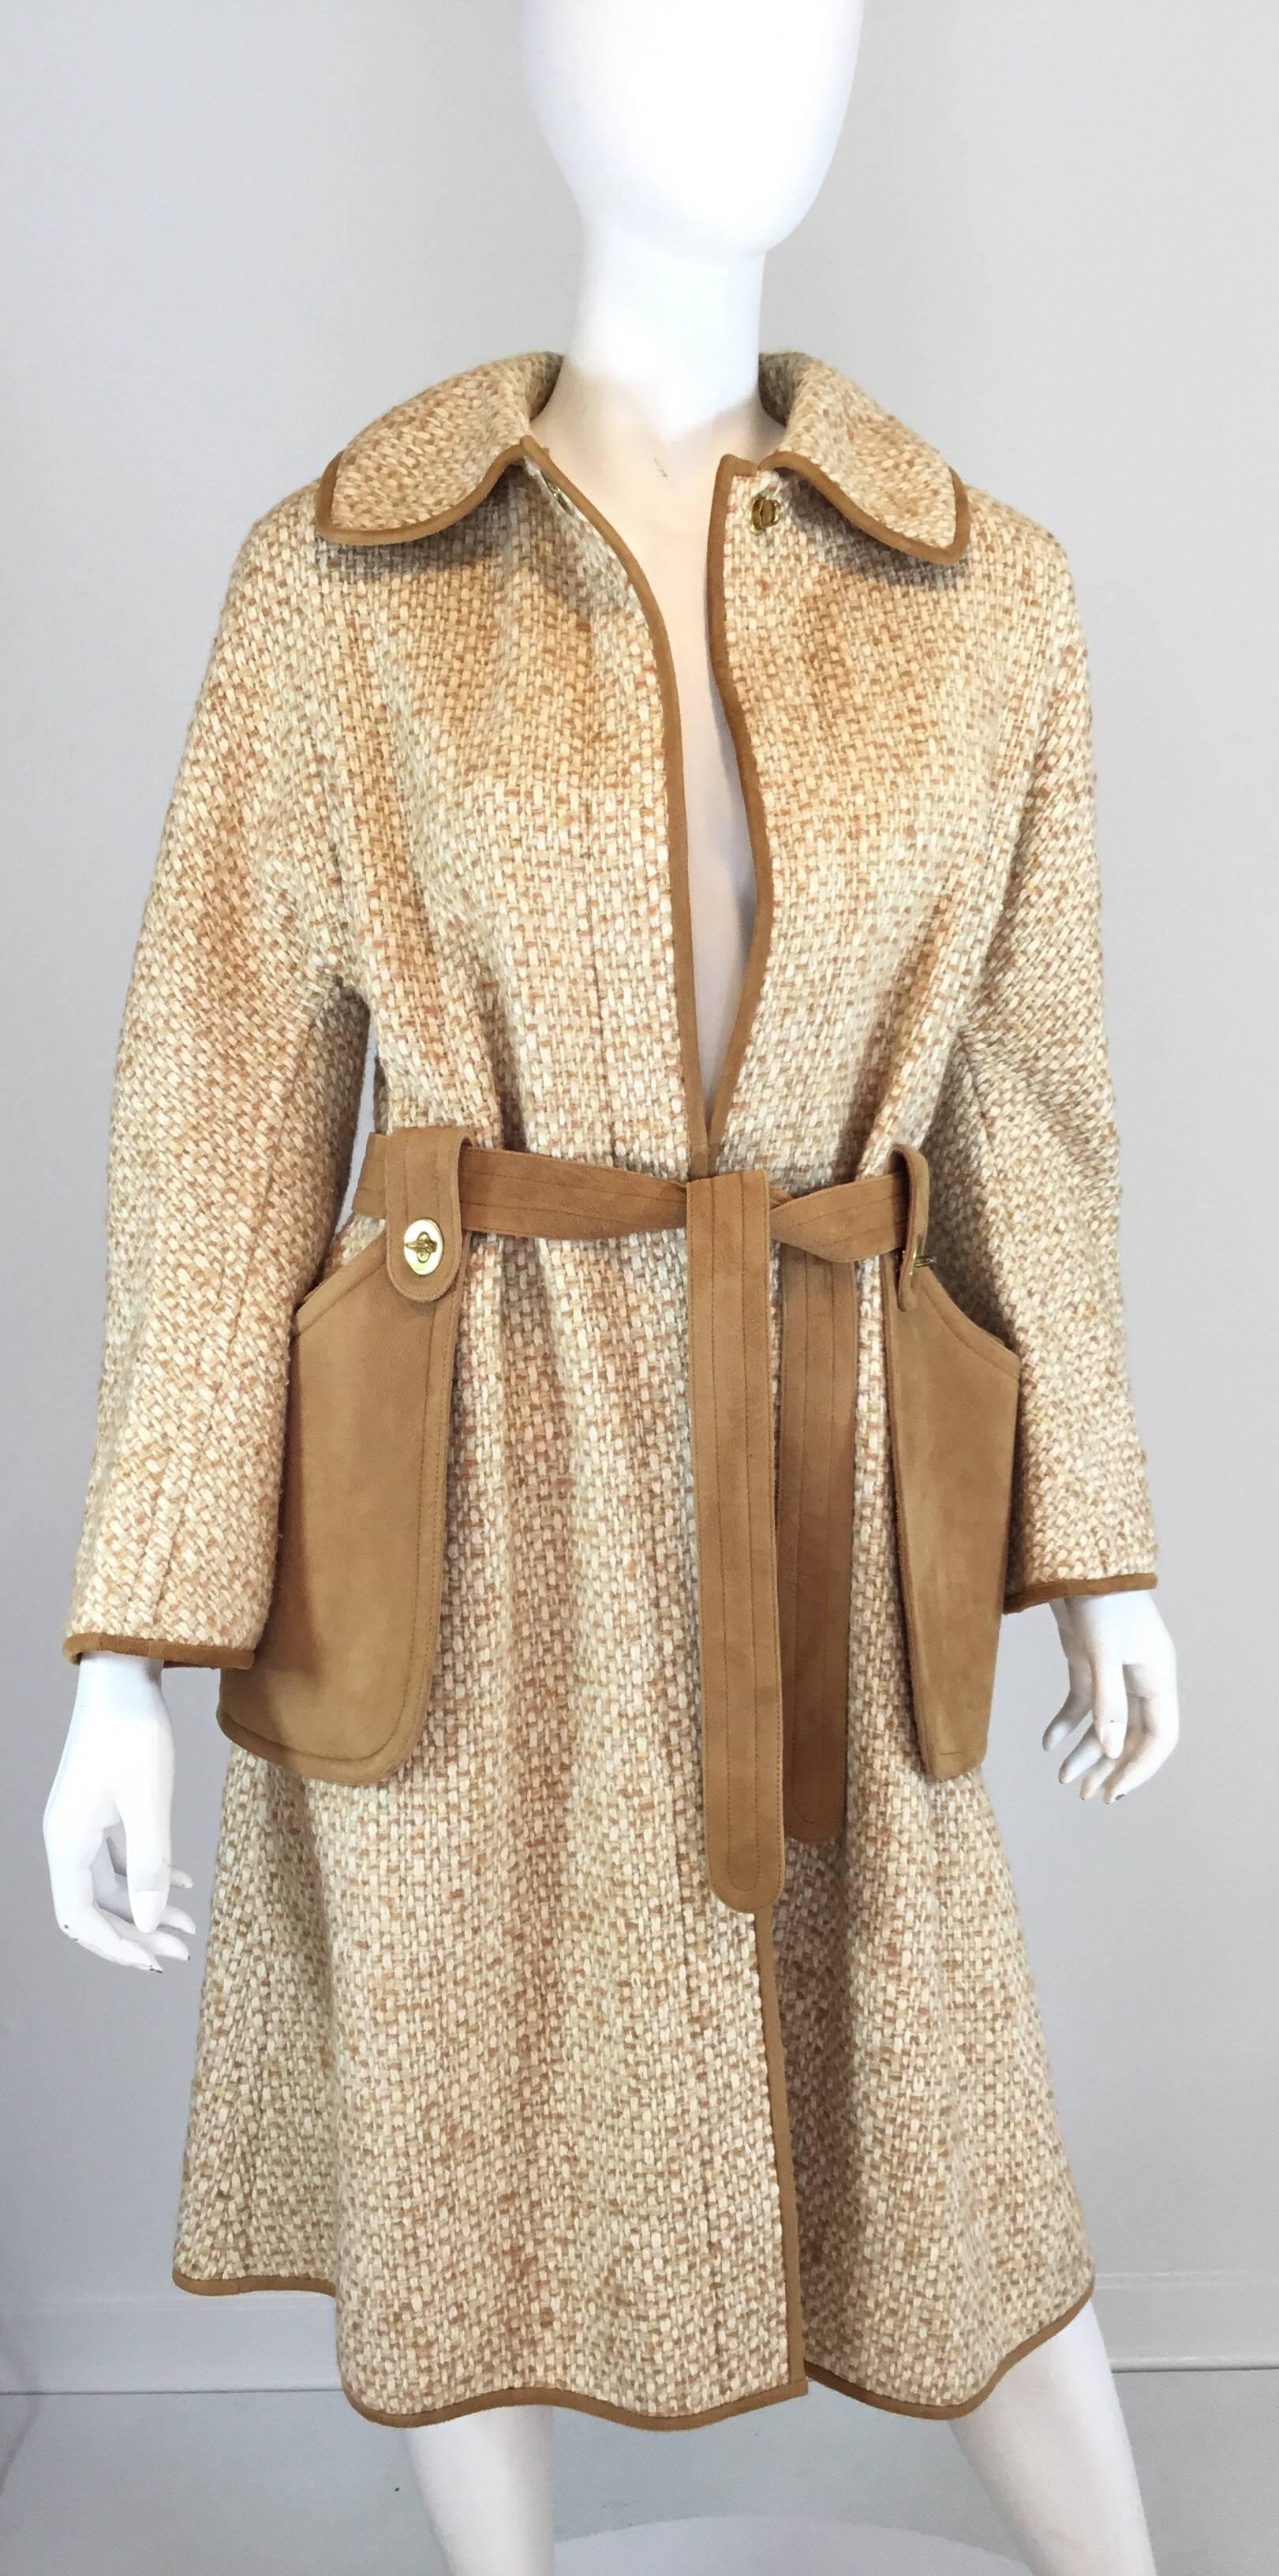 Bonnie Cashin coat from 1970's has suede leather belt, XL suede removable pockets and suede trimmings. The removable pockets with Coach turncock fasteners at the waist and gold-tone turncock Coach turn lock closure at the neck.  Excellent